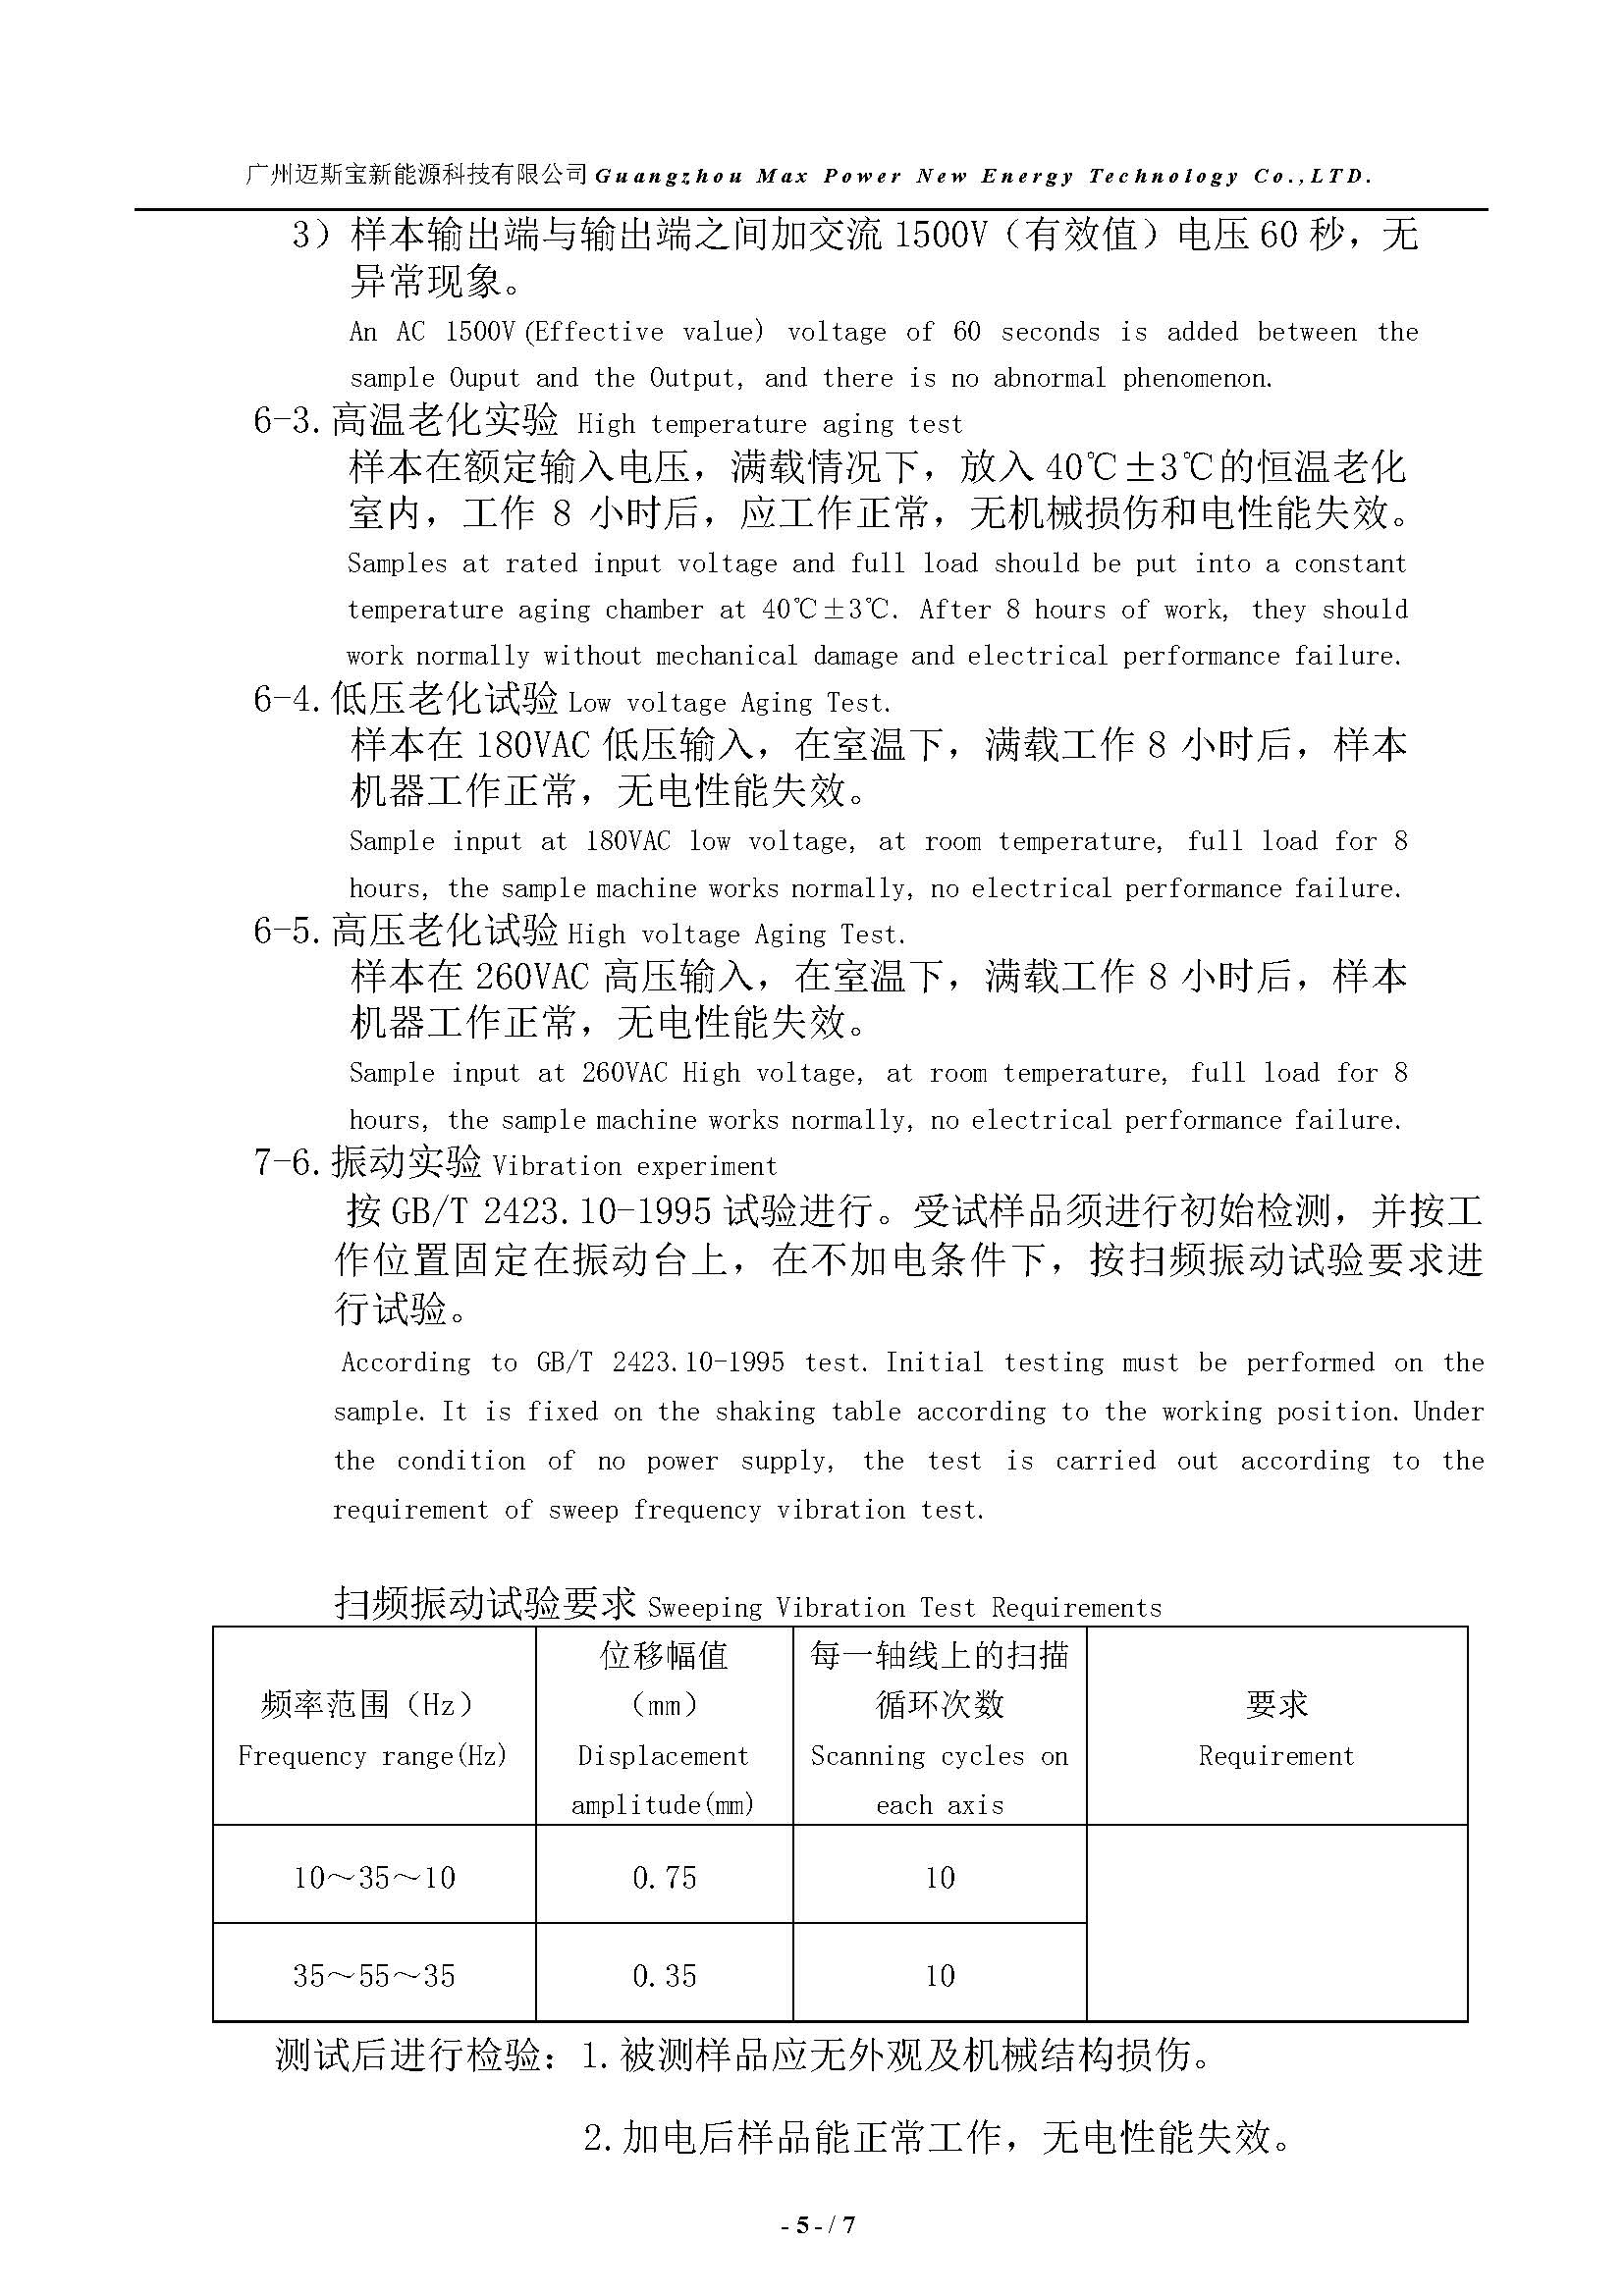 OBC4830_product specification_V1.0_0117_2021_页面_5.jpg